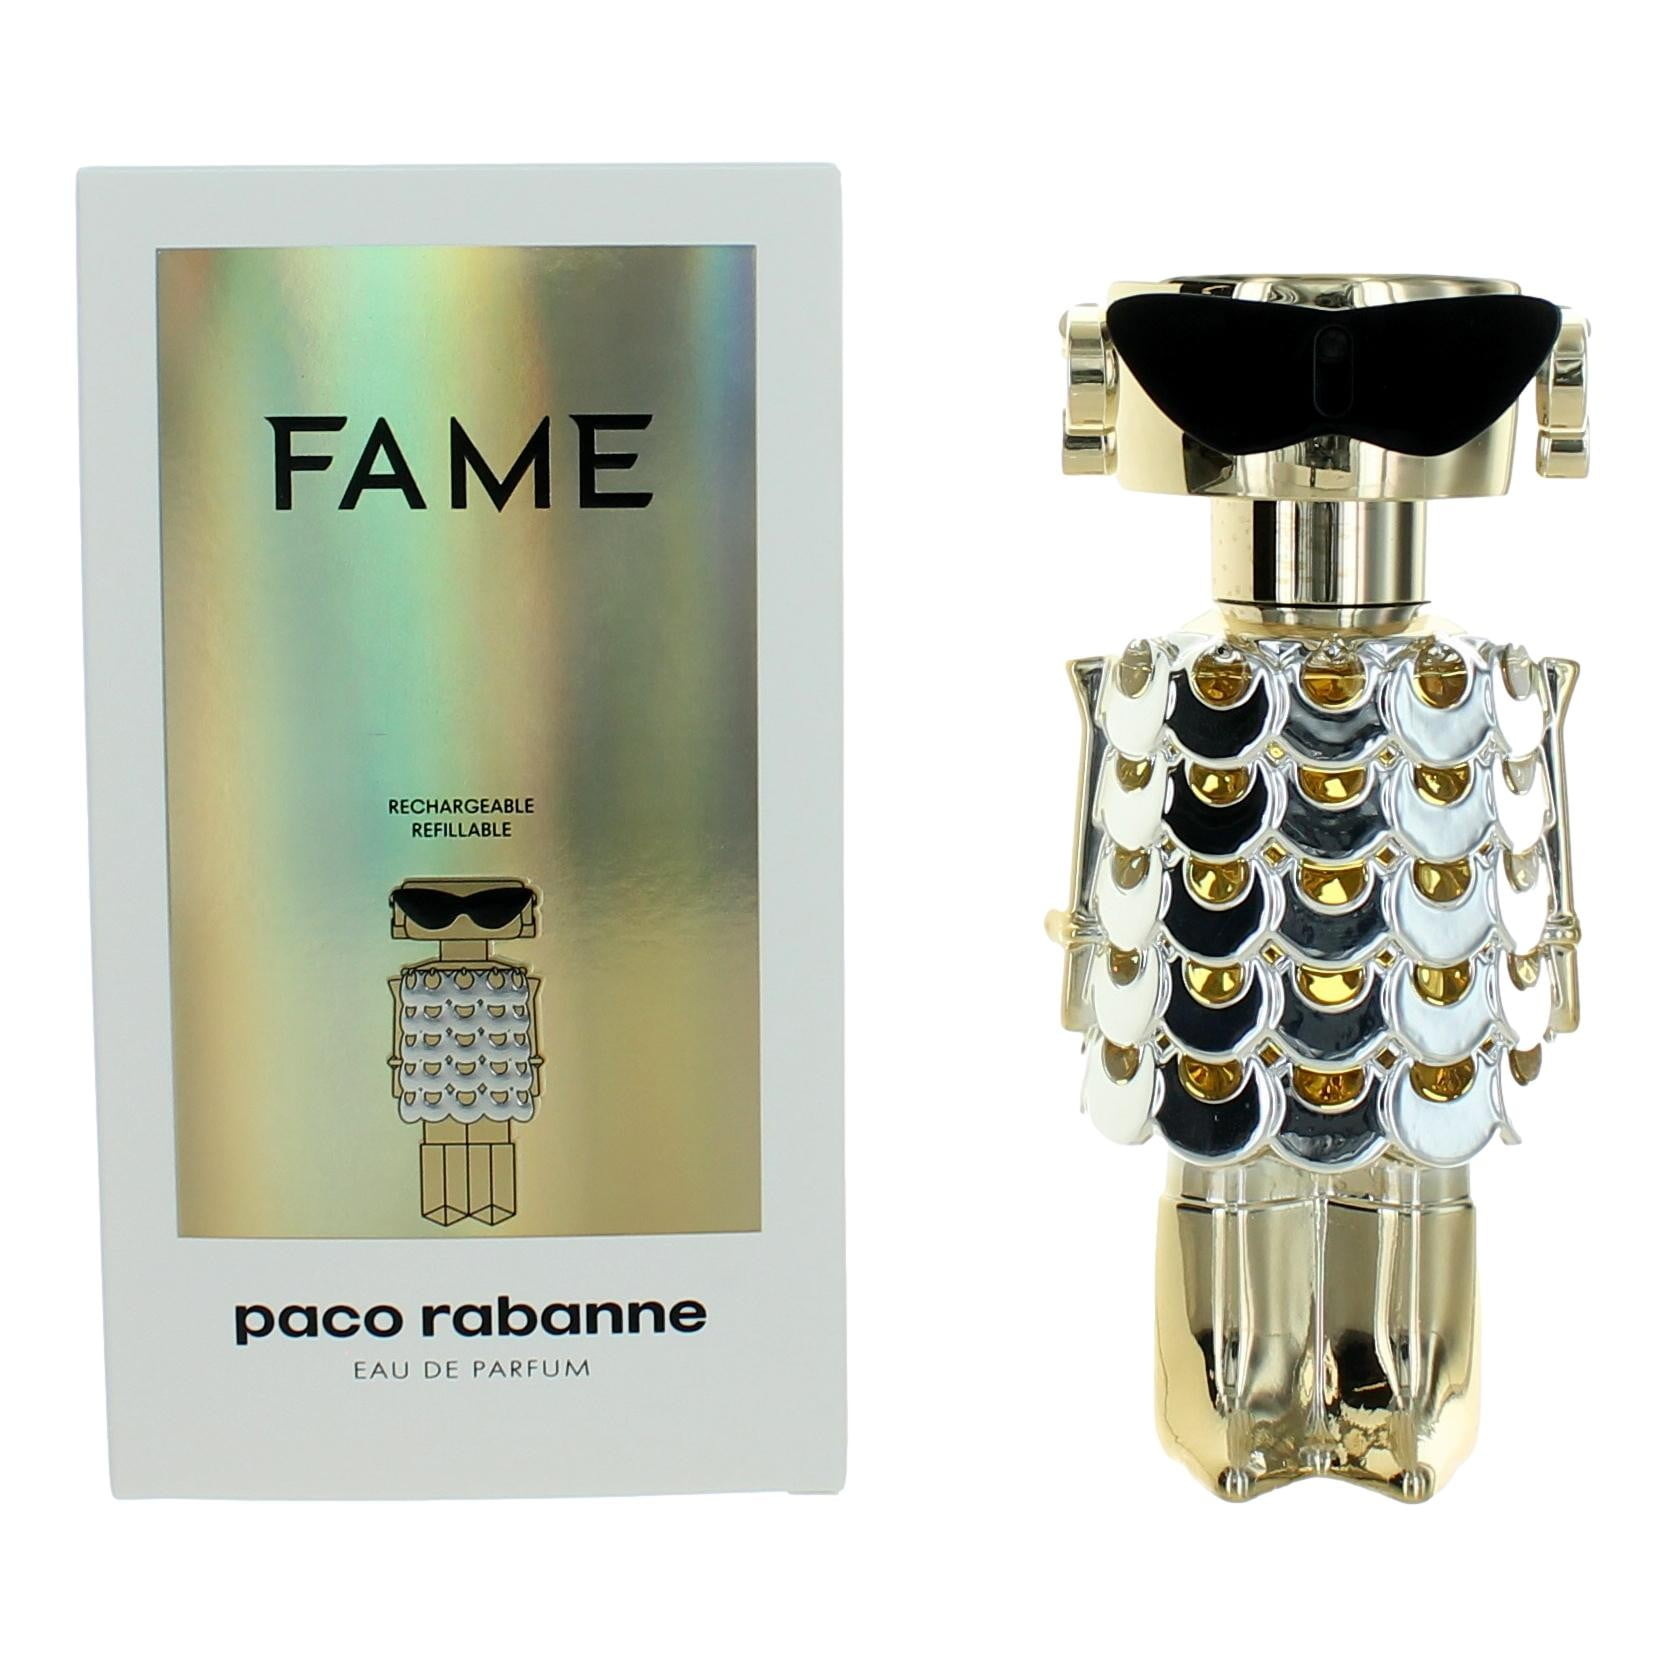 Fame by Paco Rabanne for Women - 2.7 oz EDP Spray (Refillable ...